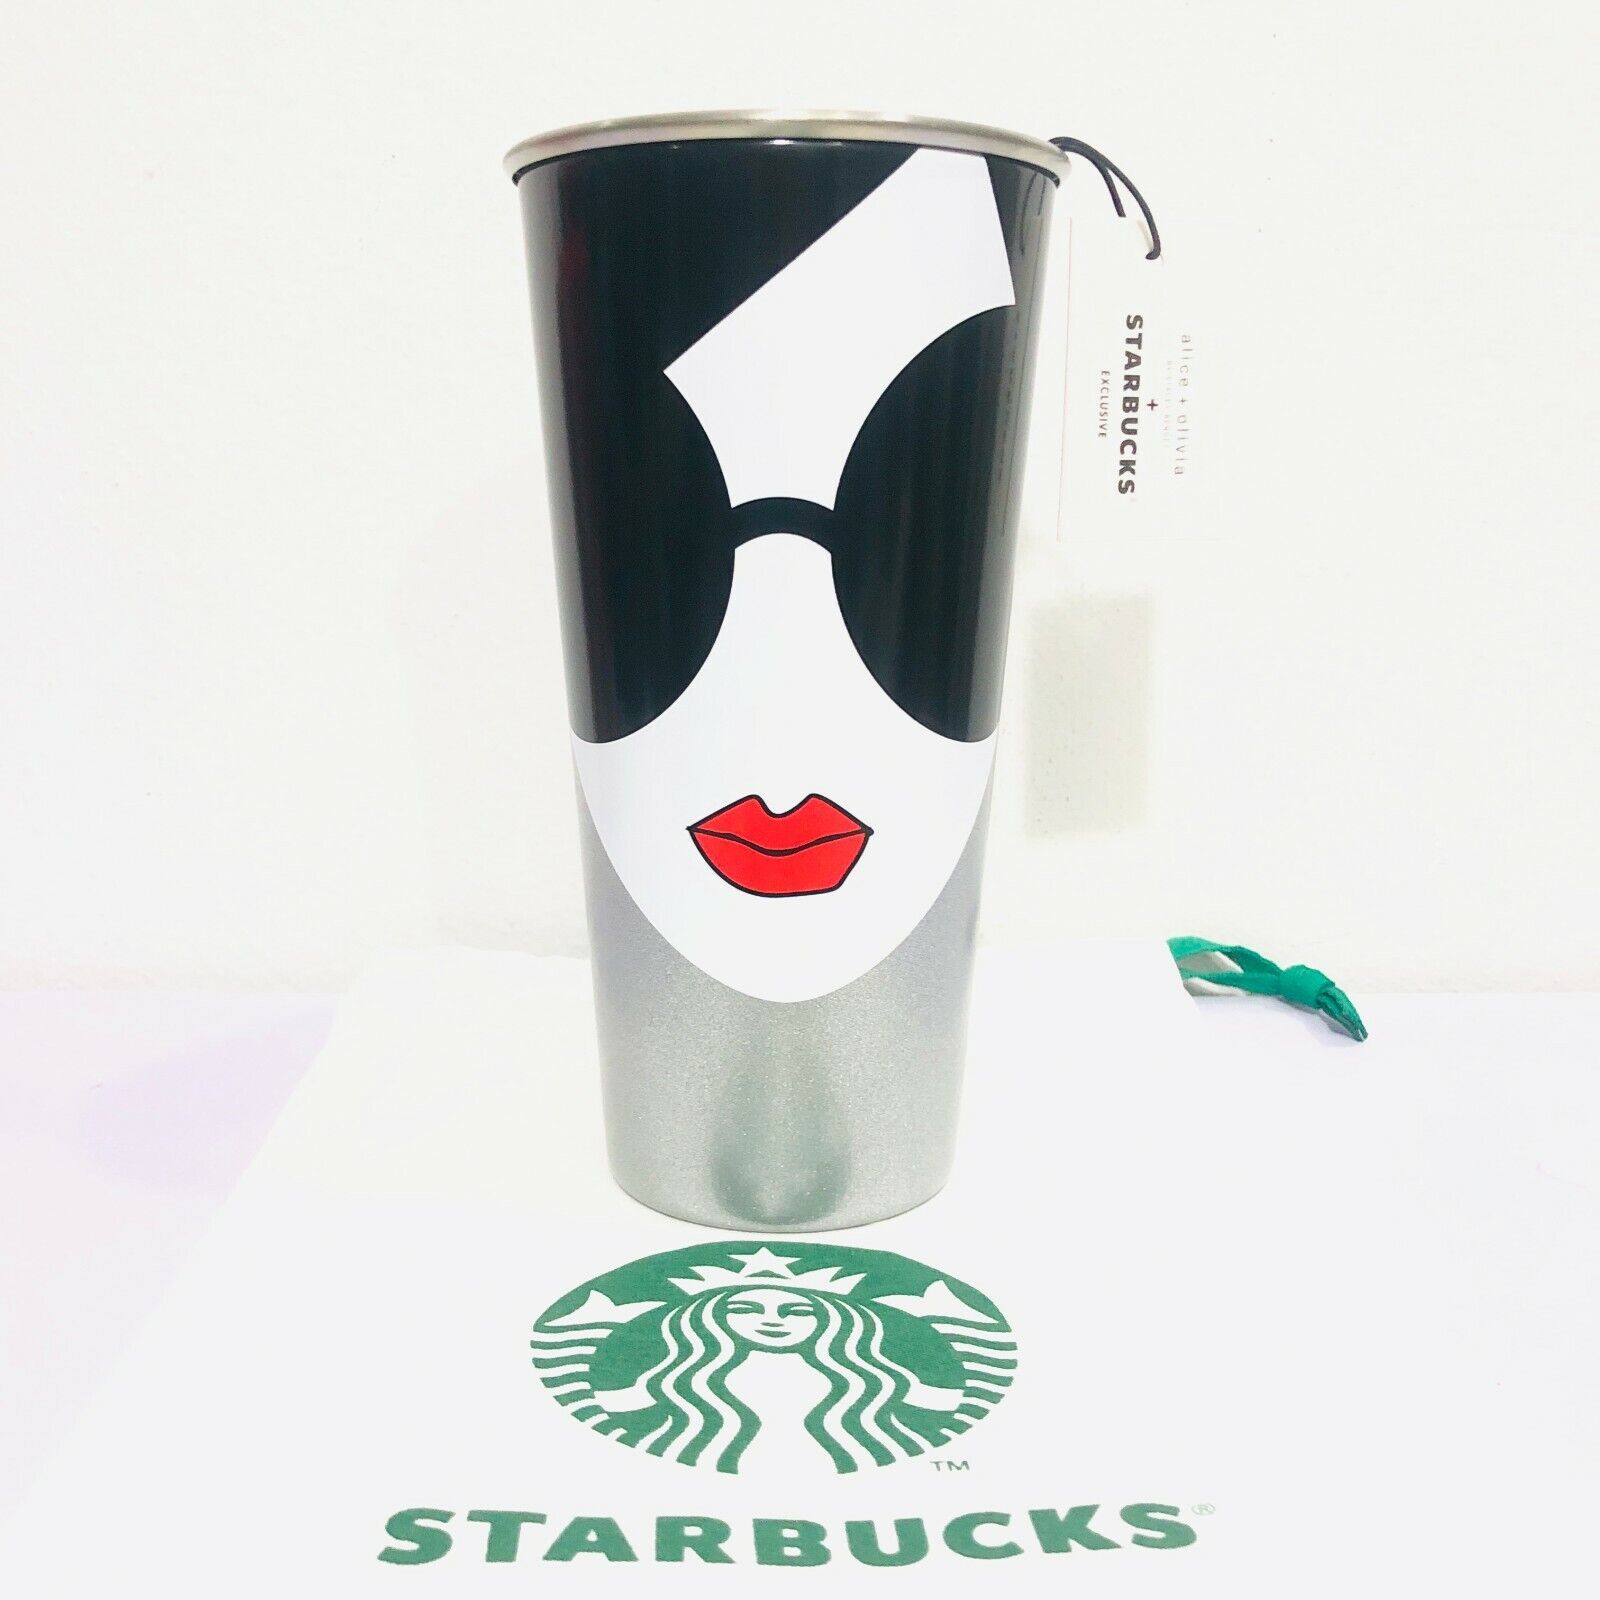 Starbucks+alice+olivia Stainless steel Tumbler 16oz.Double Wall AO Iconic Stace